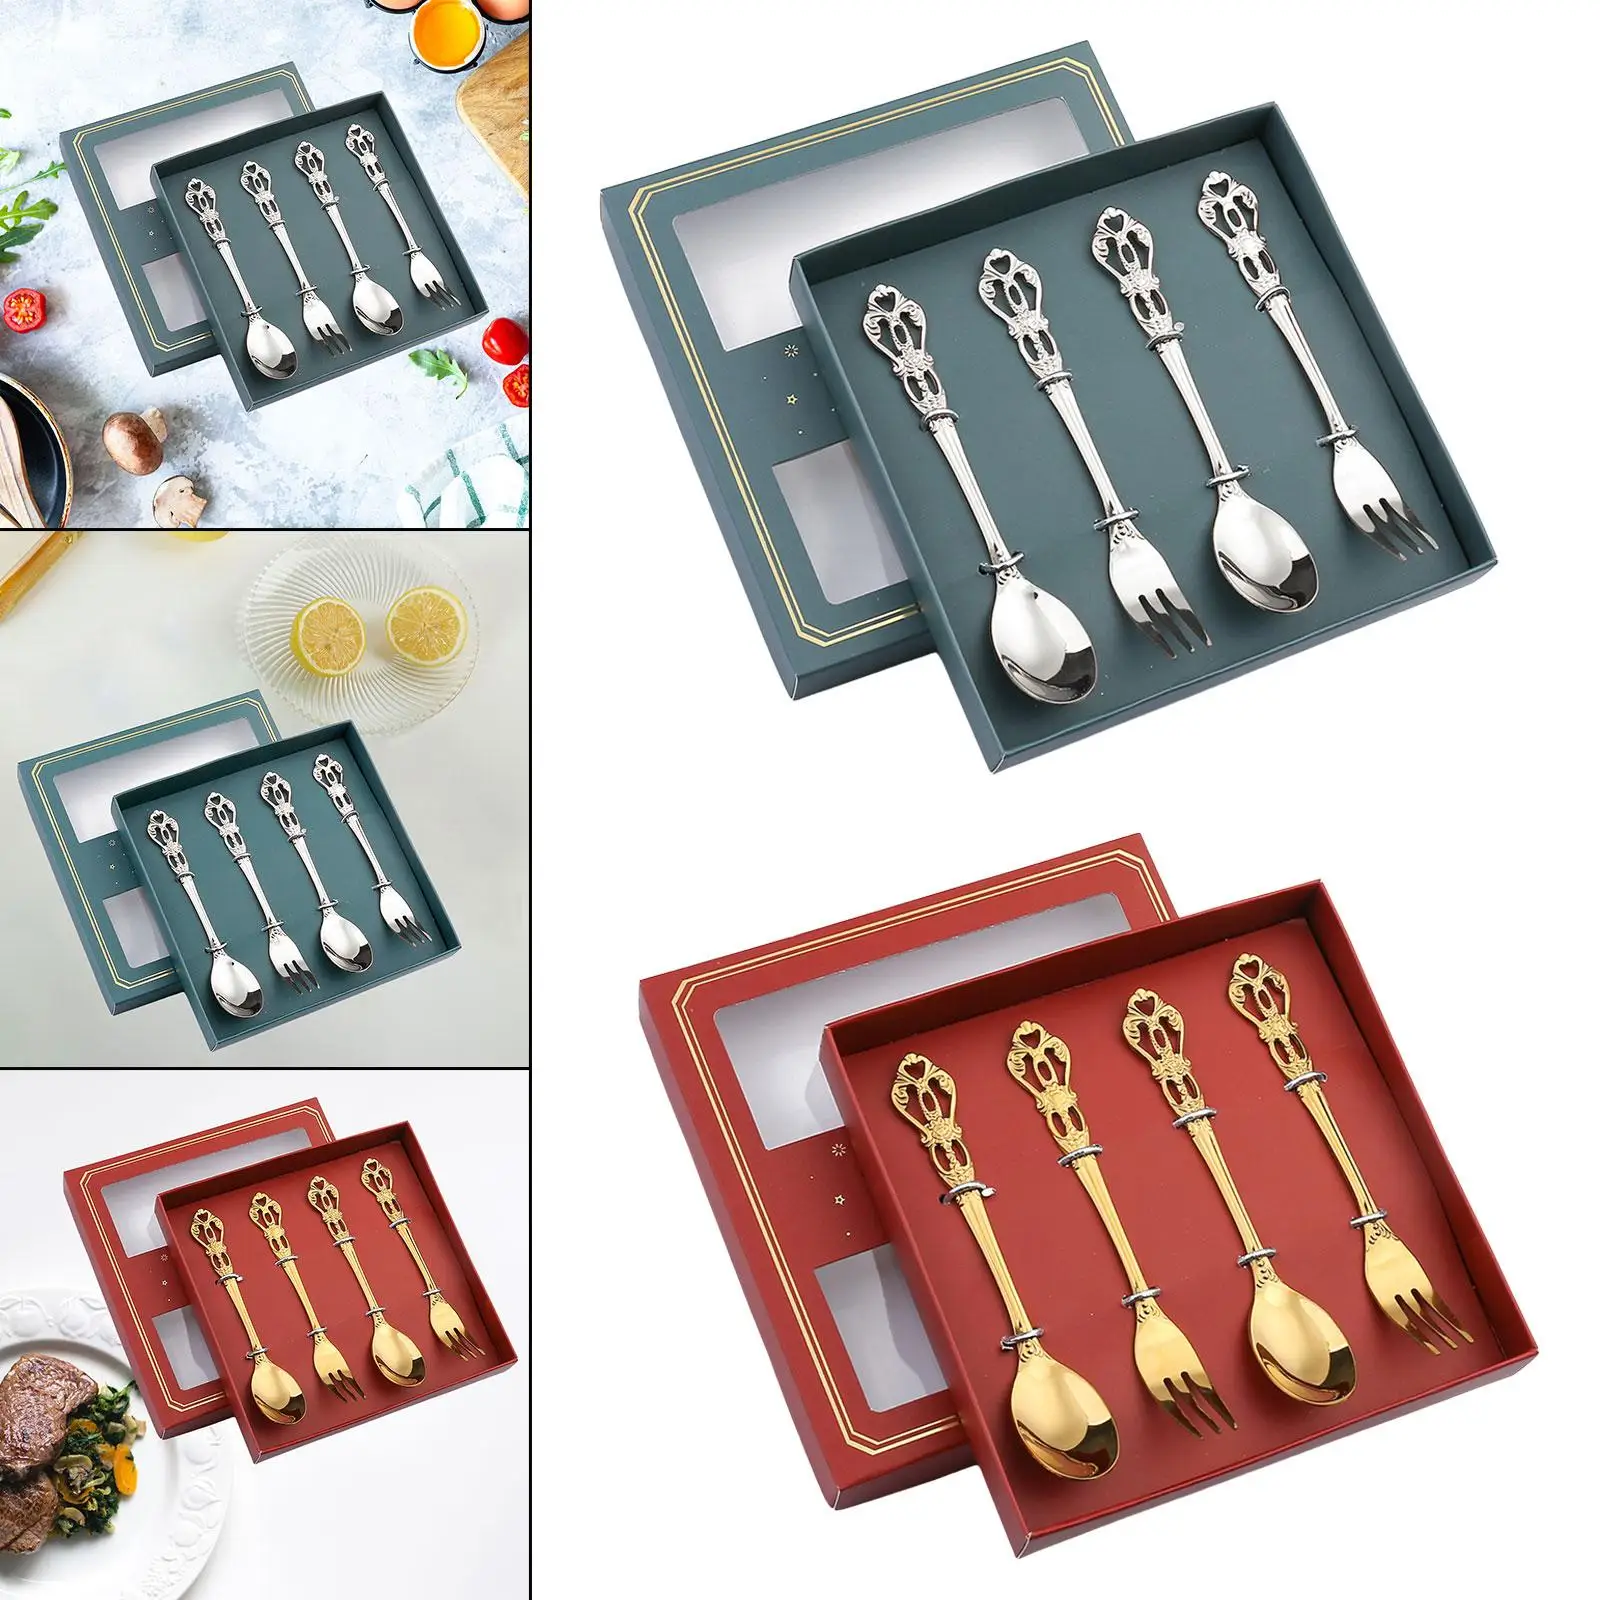 4Pcs Spoons Forks Set Stainless Steel with Gift Box Pastry Forks and Tea Spoon Set for Wedding Sugar Ice Cream Salad Cake